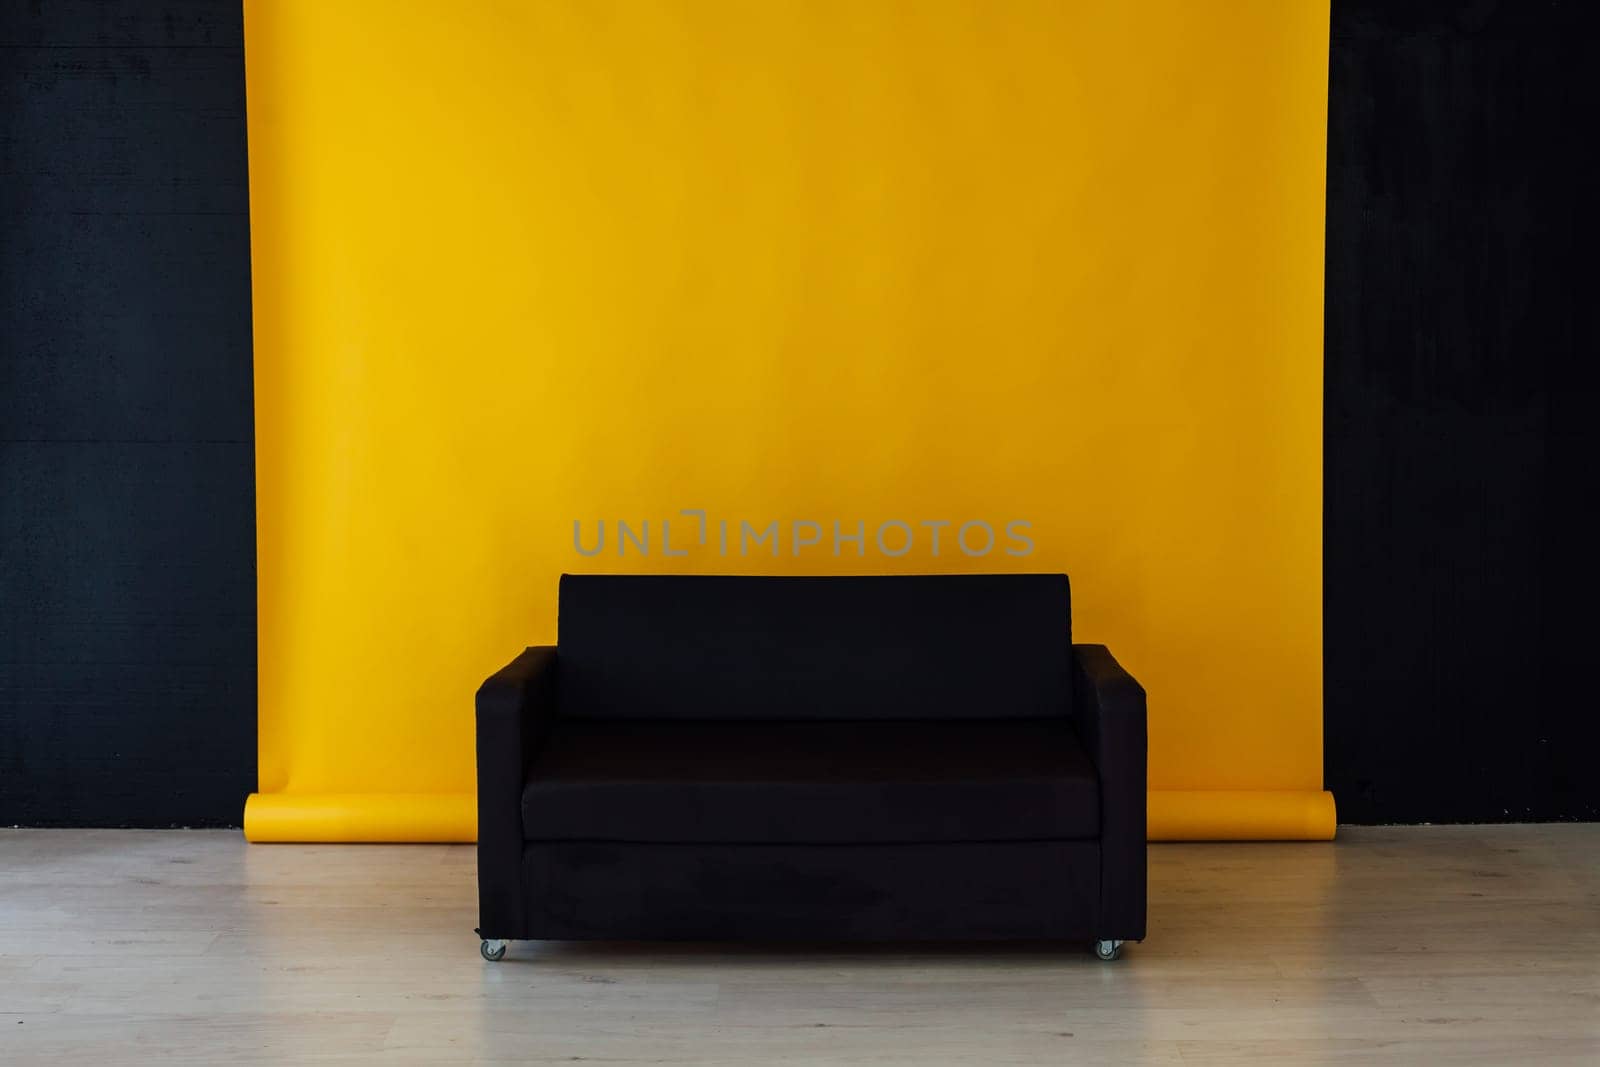 sofa in the interior of the yellow room